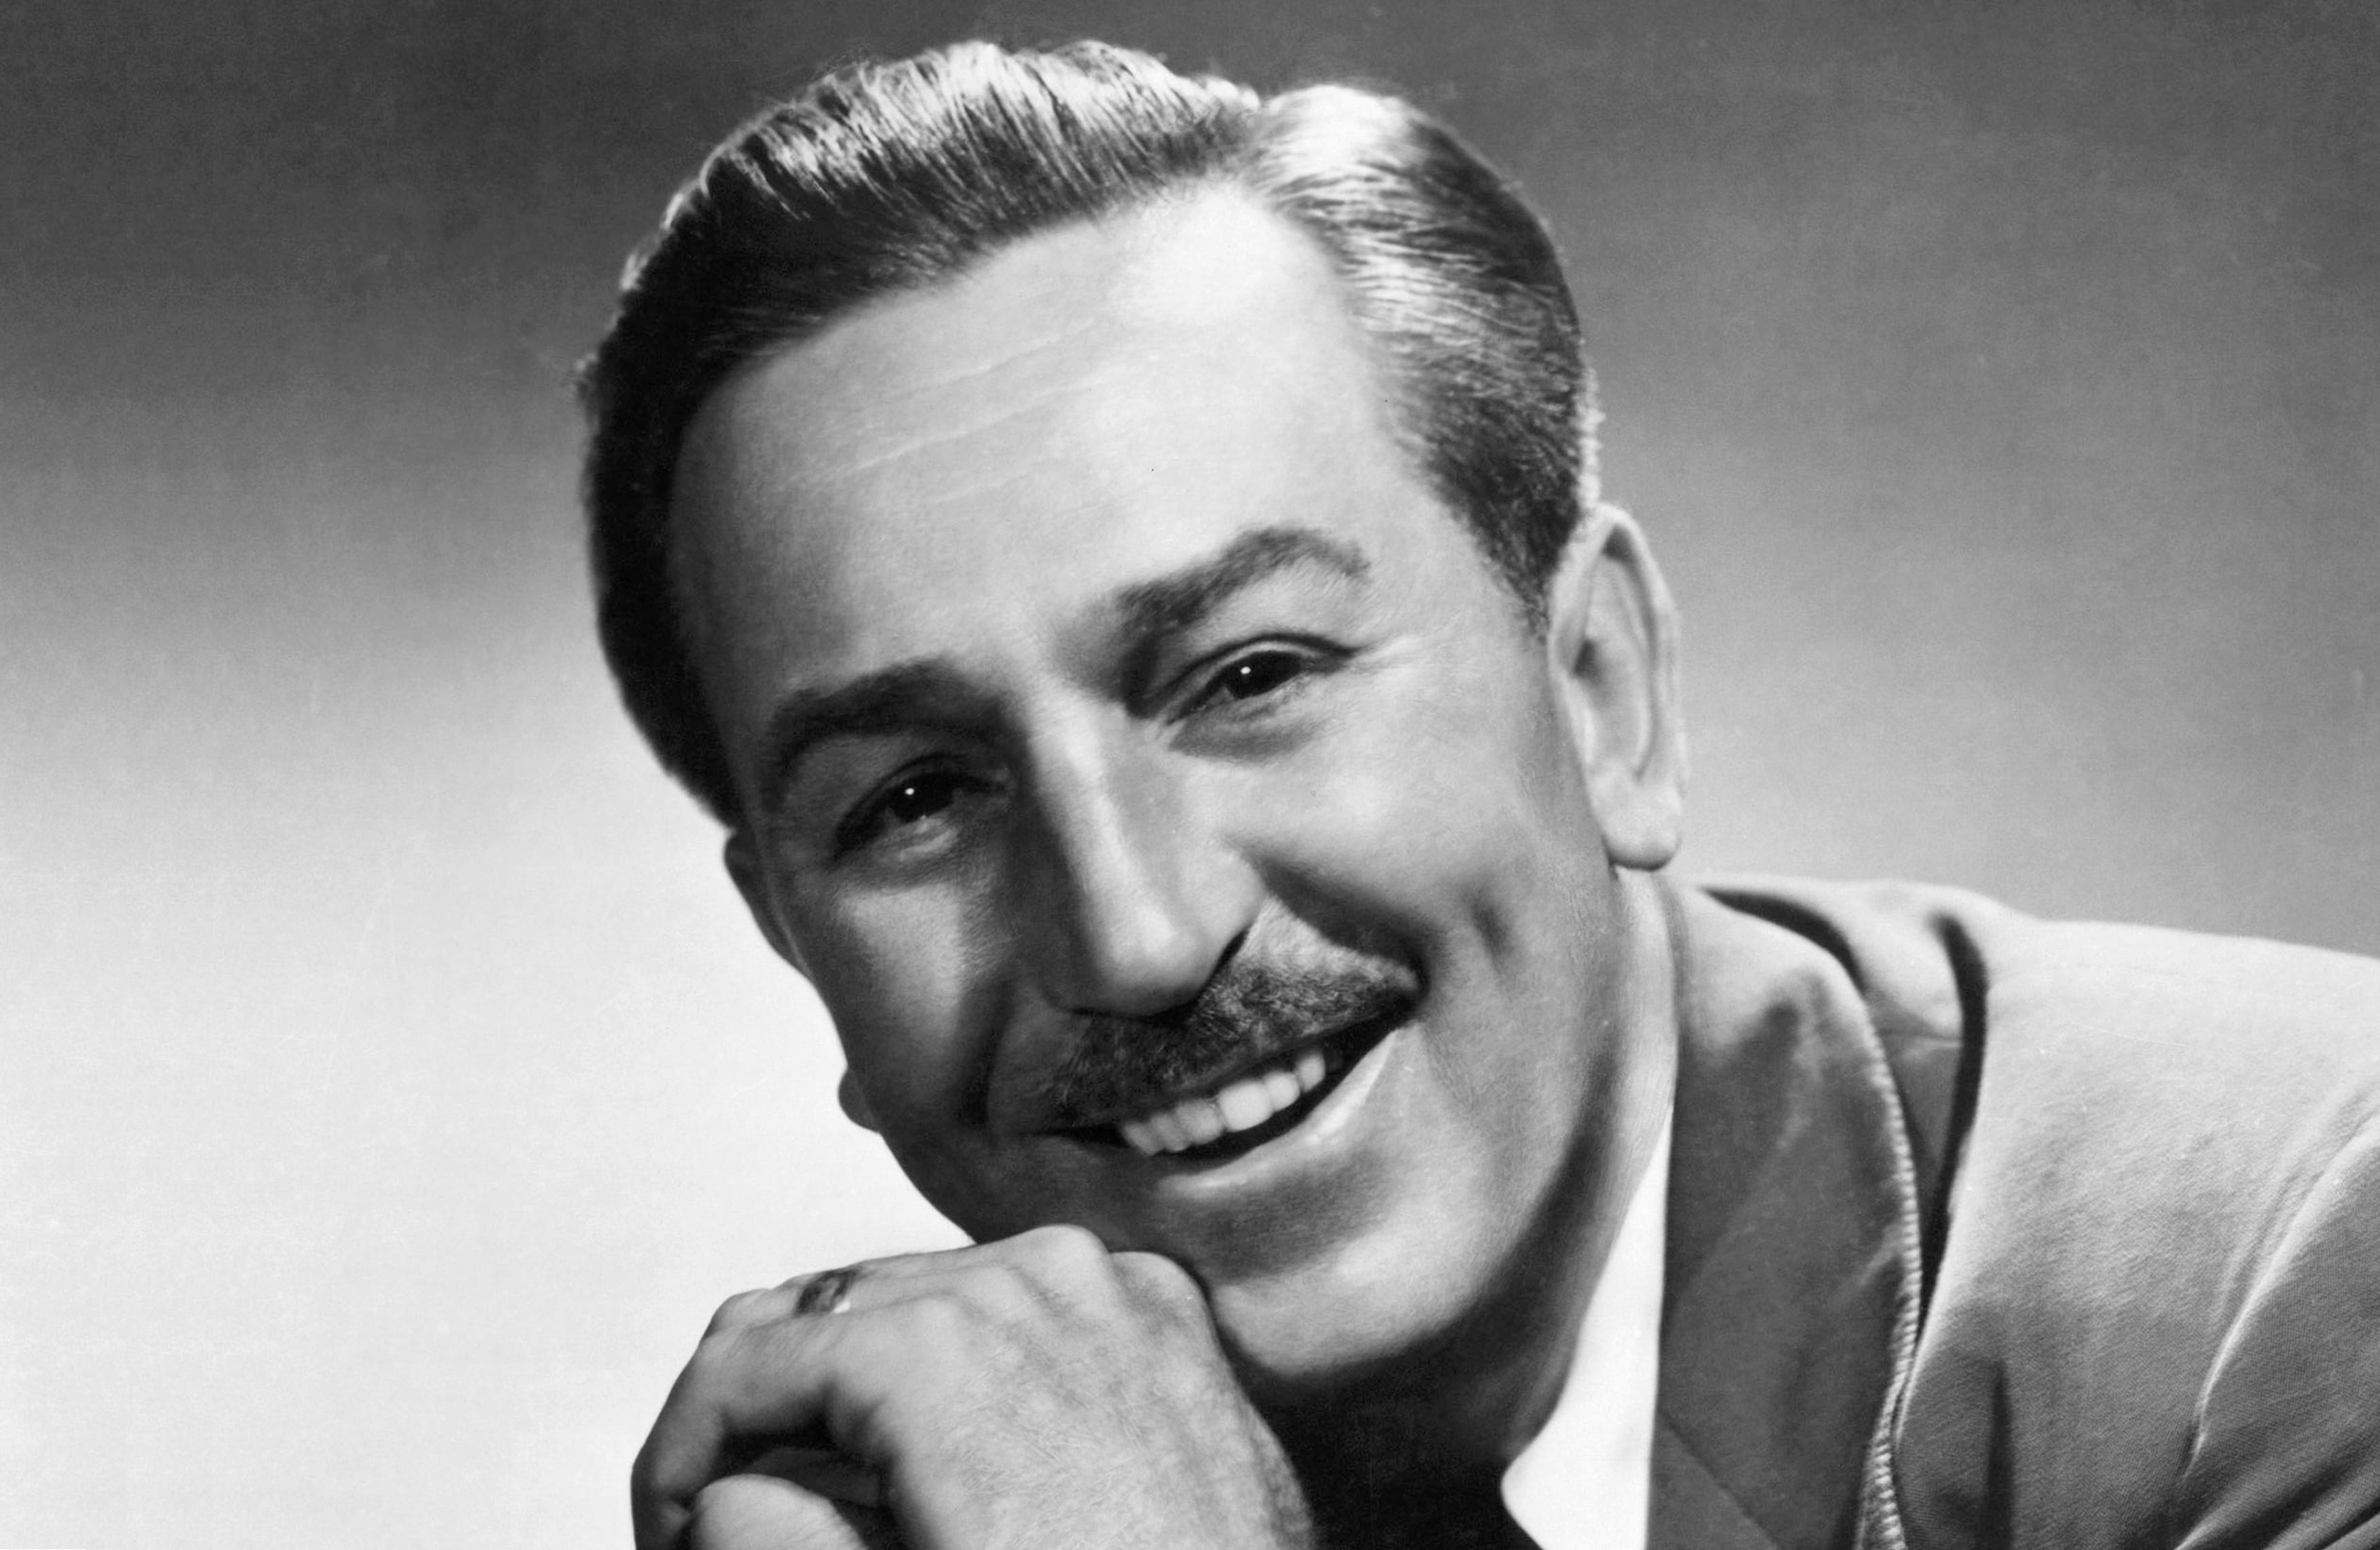 OpEd: Stop Pretending You Know What Walt Disney Would Want – You Don’t